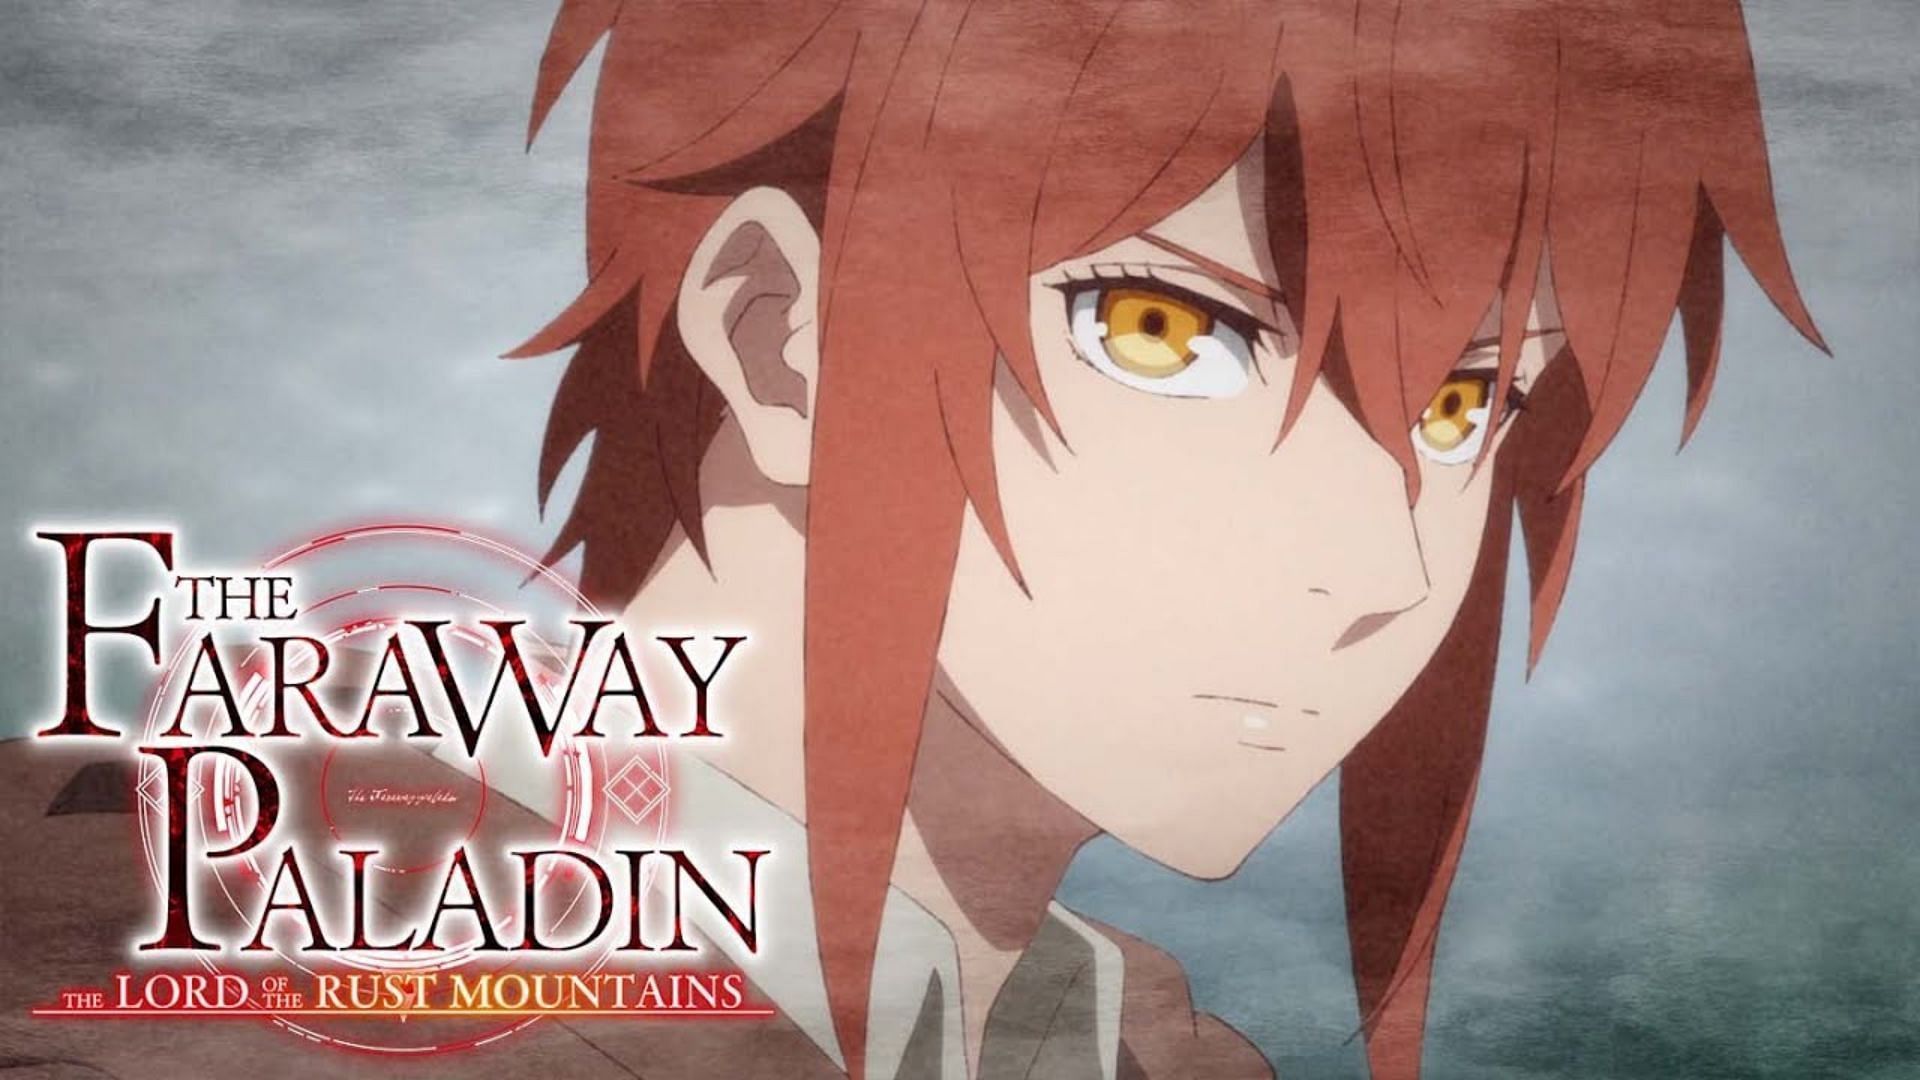 The Faraway Paladin: The Lord Of Rust Mountain Anime Release Date Announced  | Anime release, Anime, Anime release dates